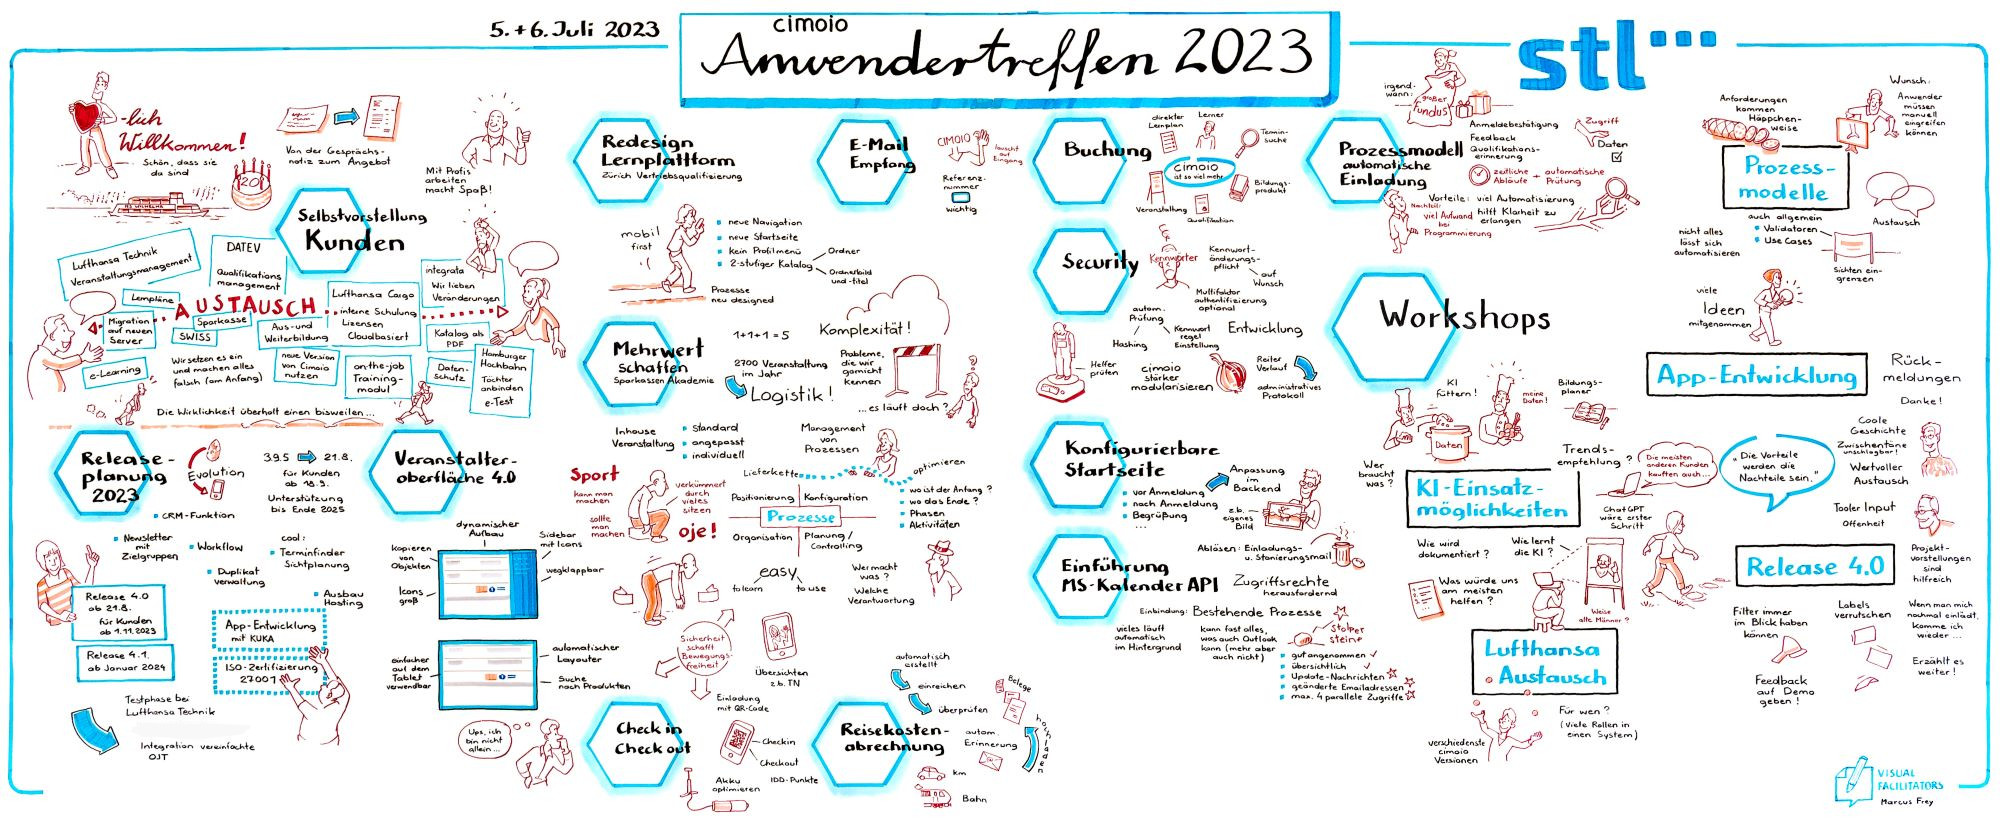 Graphic recording of the company Visual Facilitators from the cimoio user meeting 2023